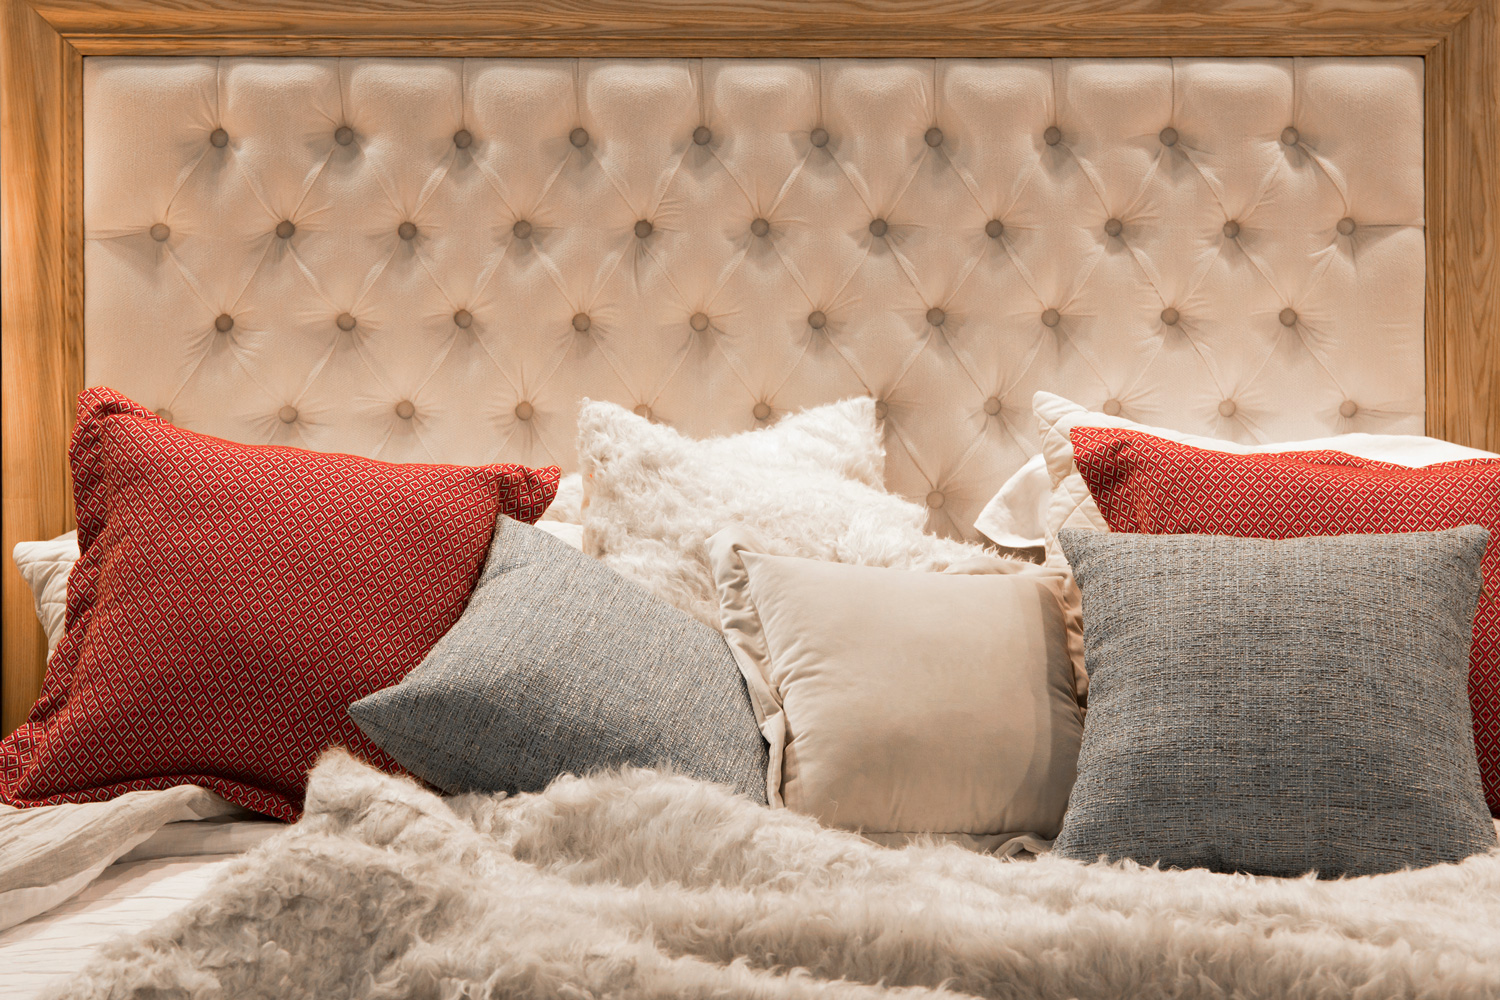 Cozy bed with quilted leather headboard in a wooden frame in beige and brown colors and pastel pillows.